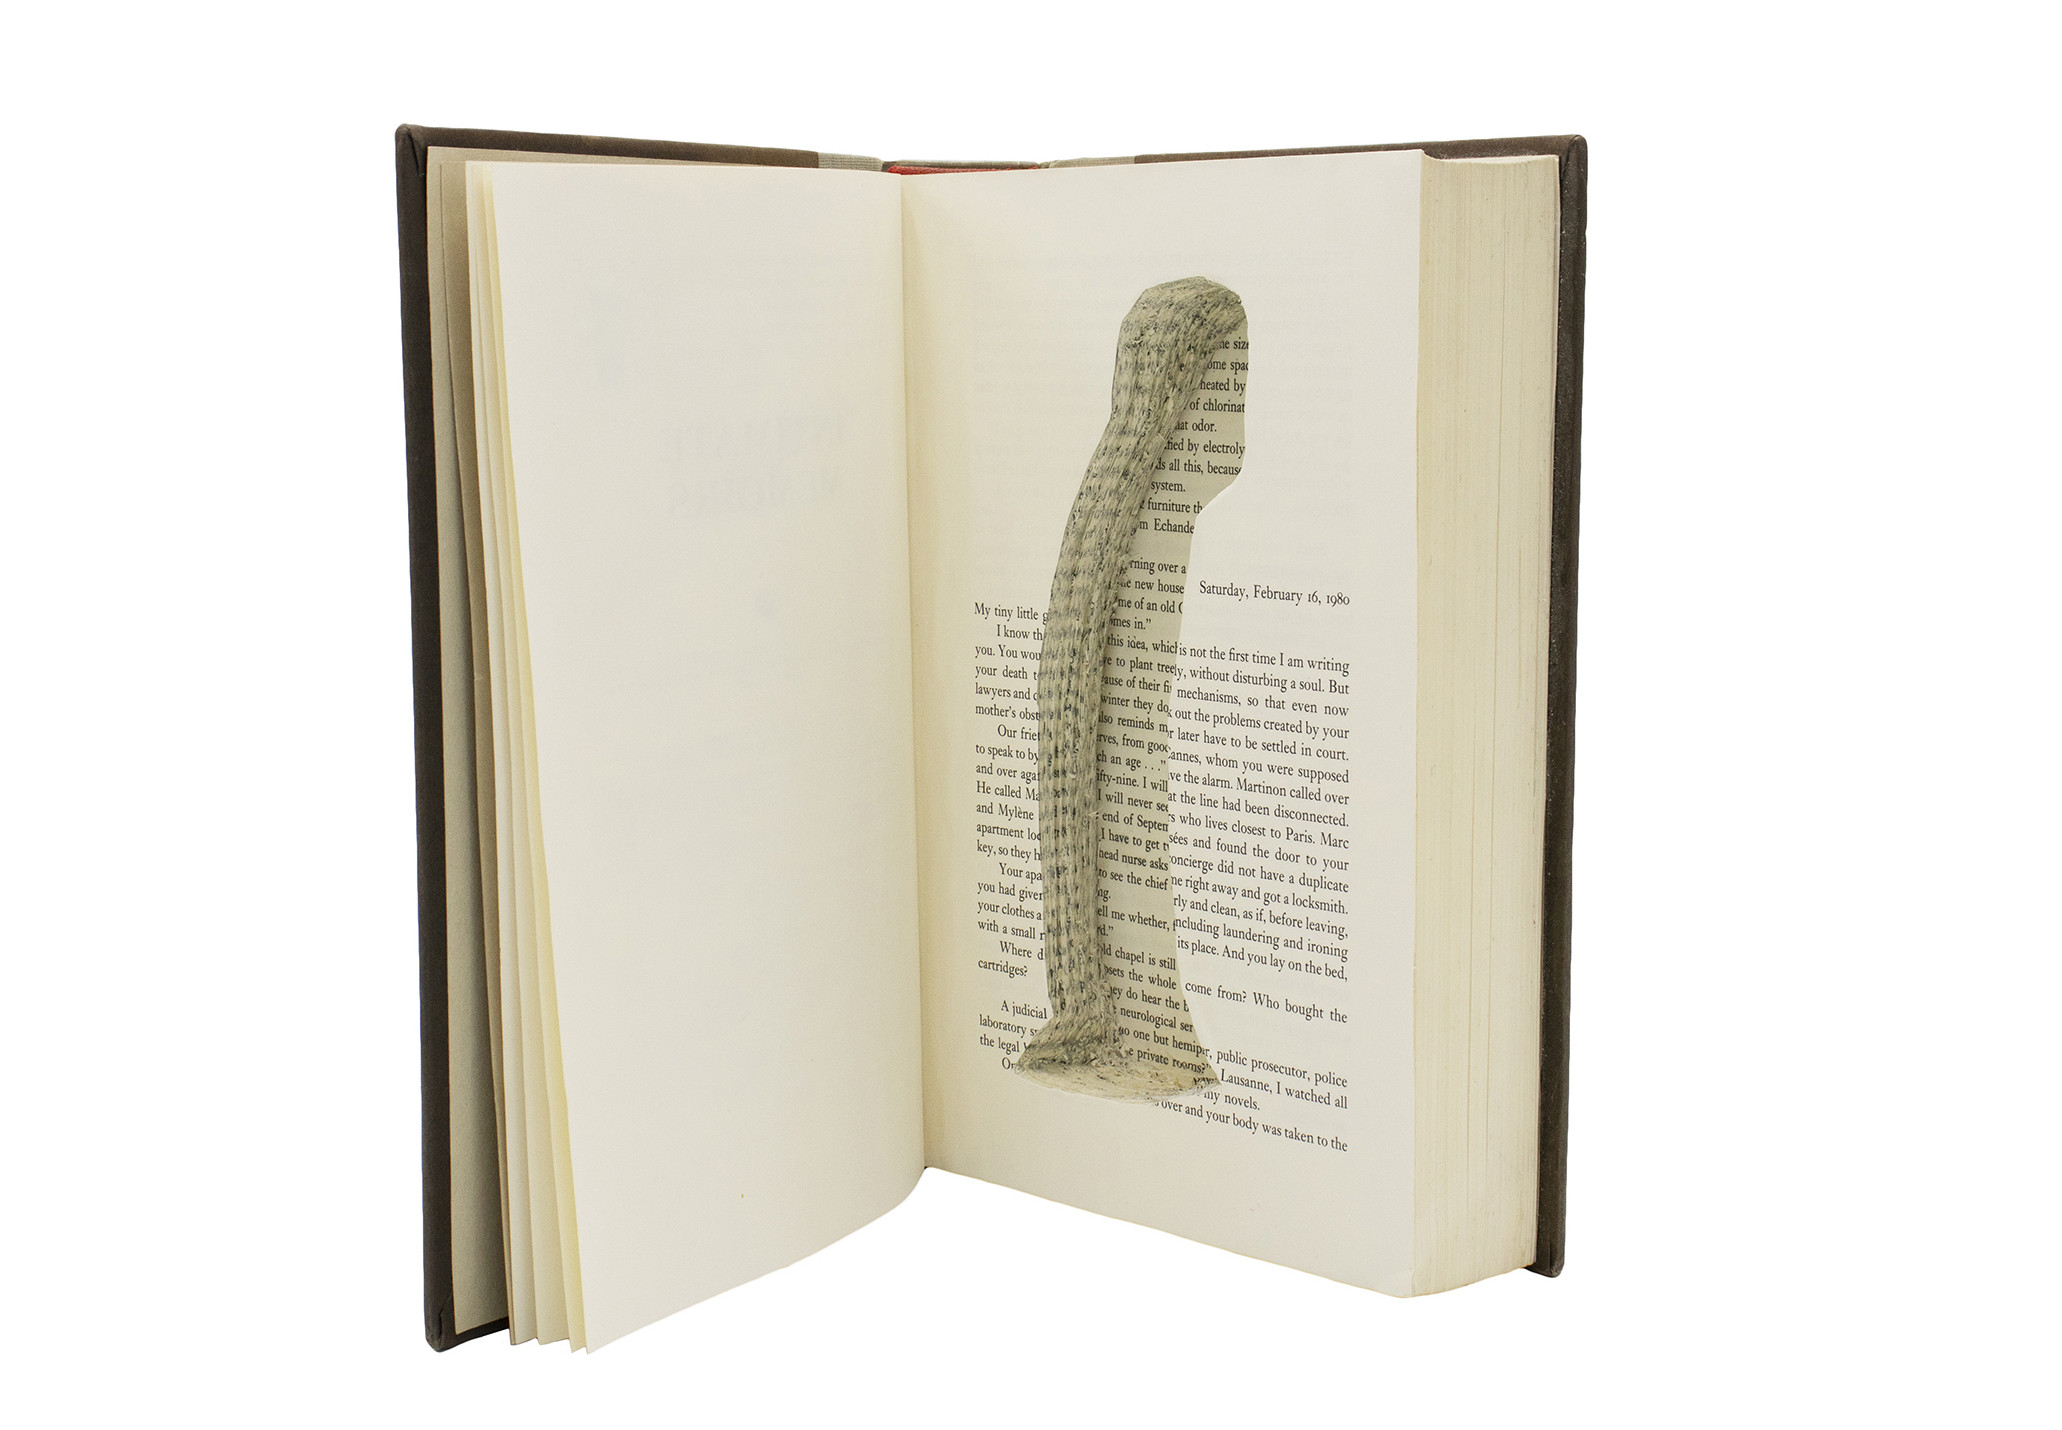 An open book with a dildo shaped hole cut into its pages